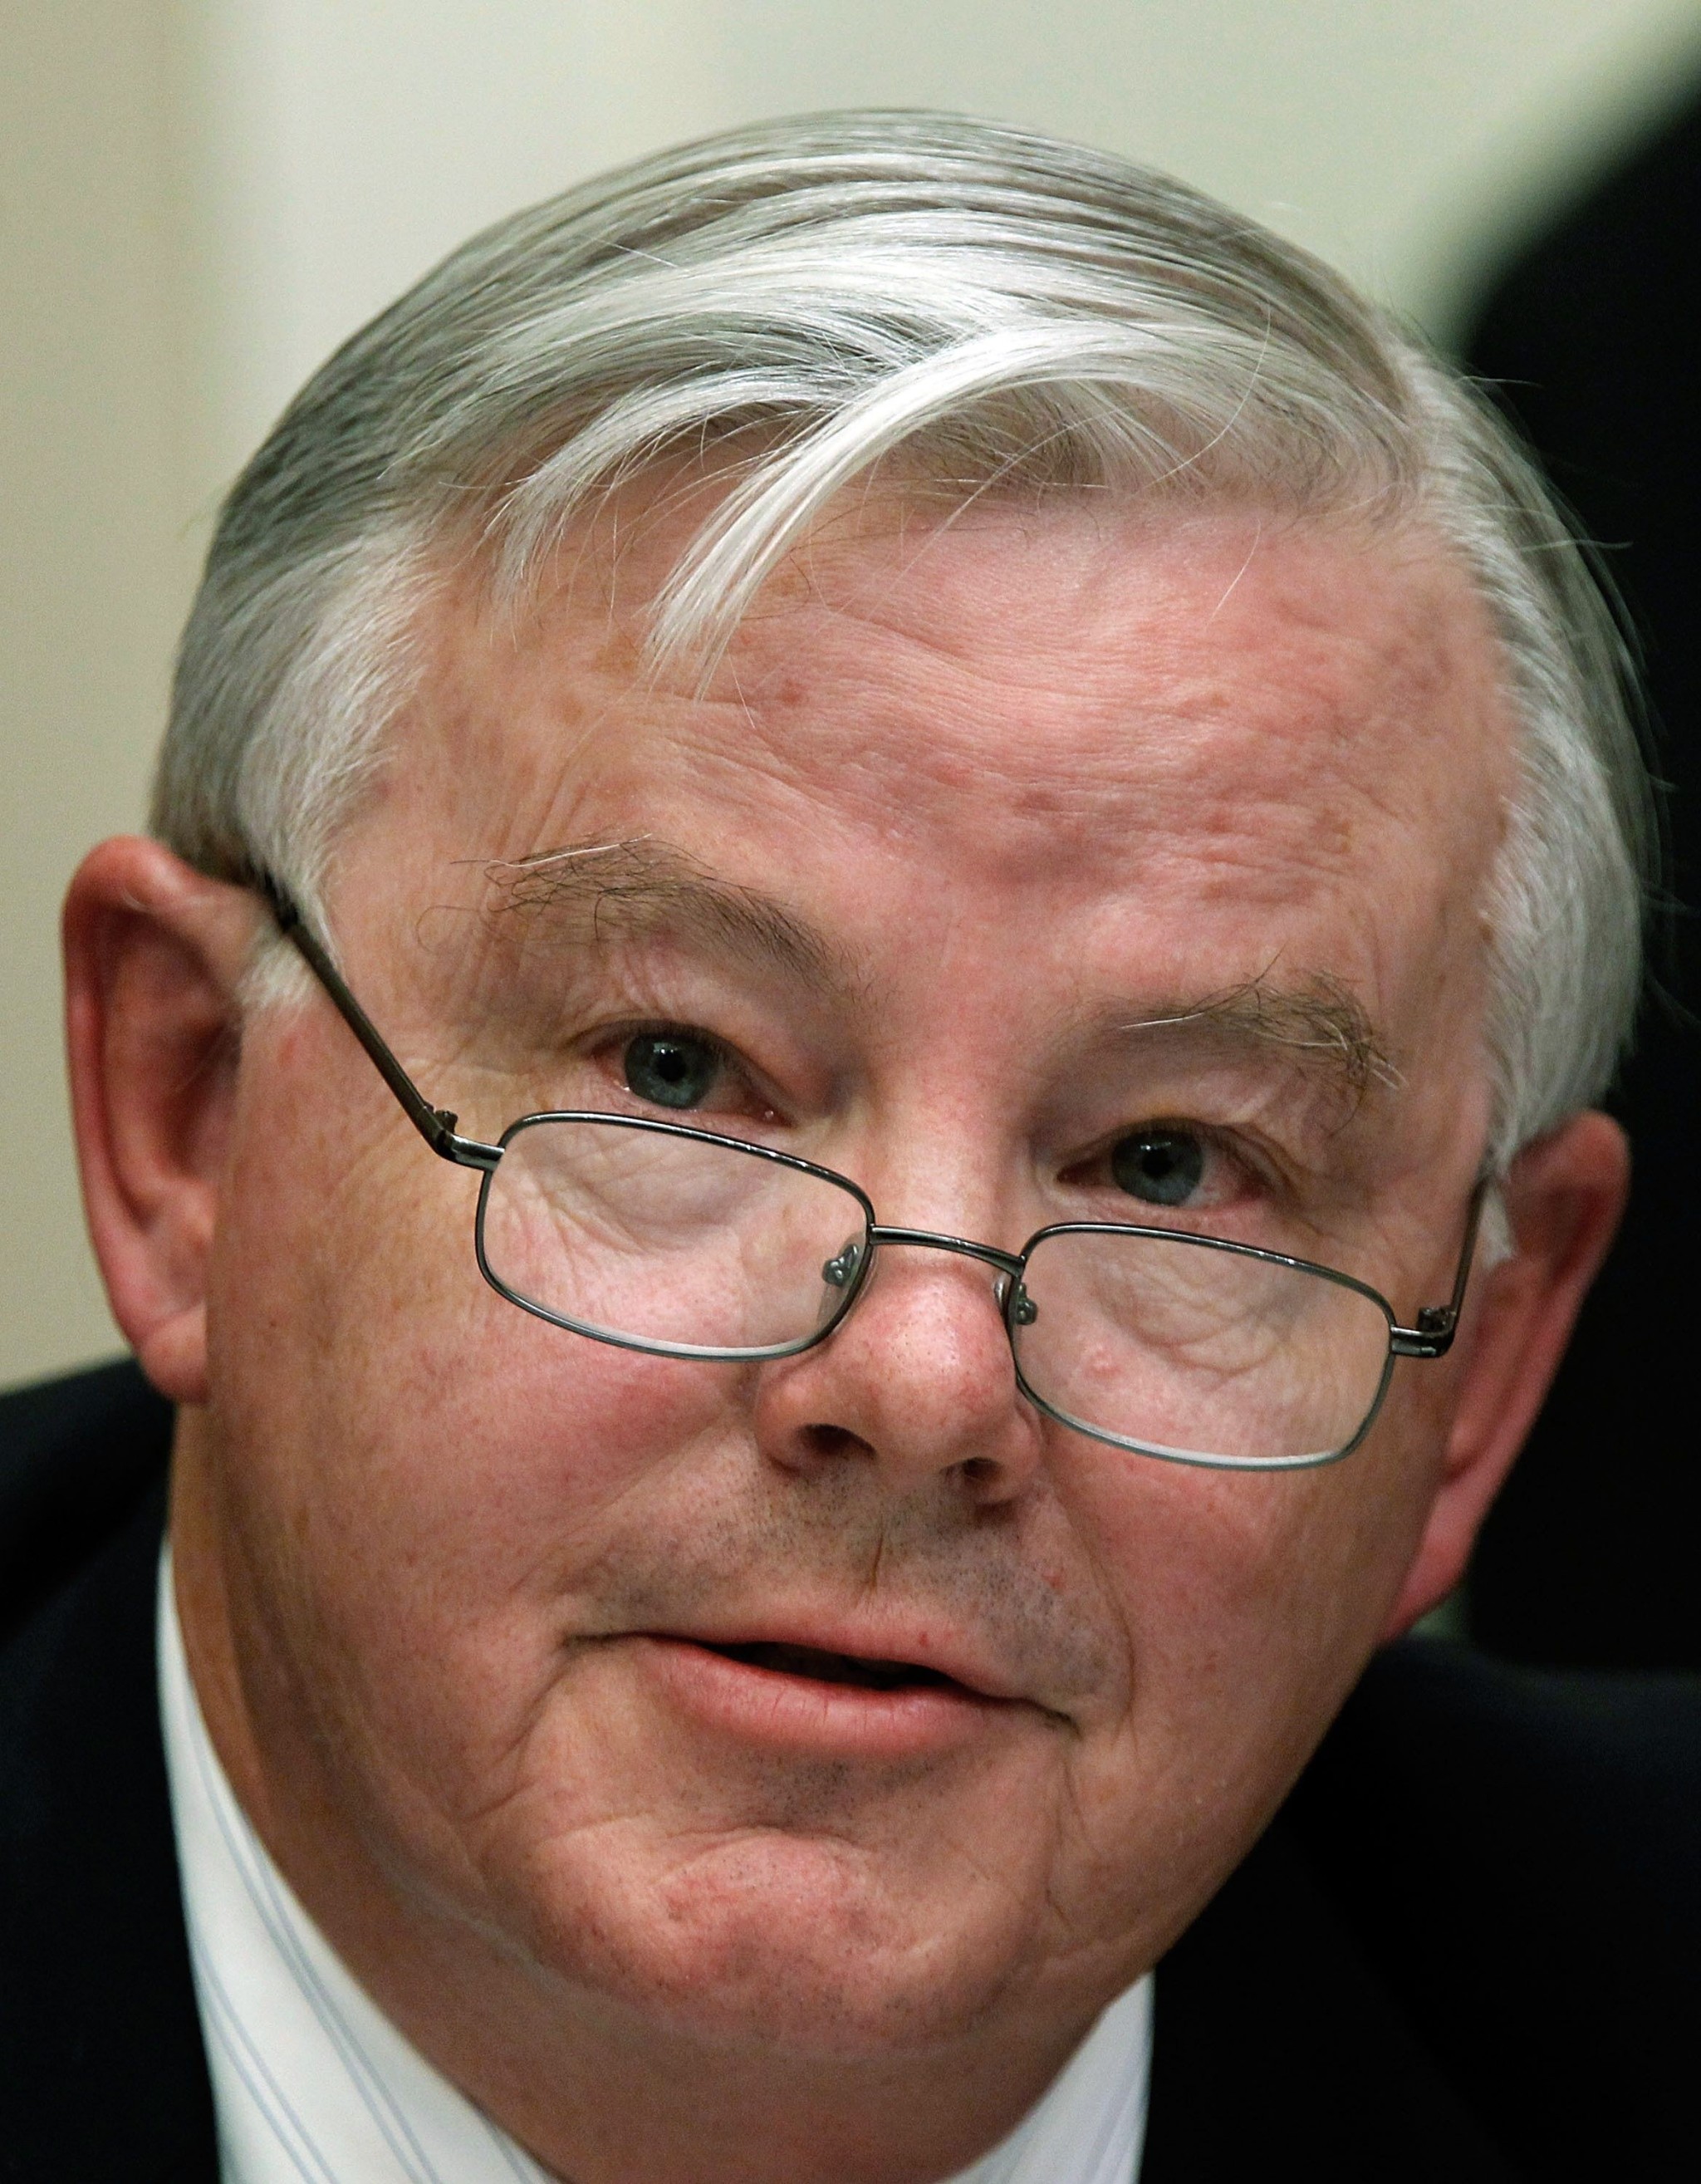 Joe Barton reportedly warned a woman that he would contact the police if she didn’t stop communicating with other women he was previously romantically involved with